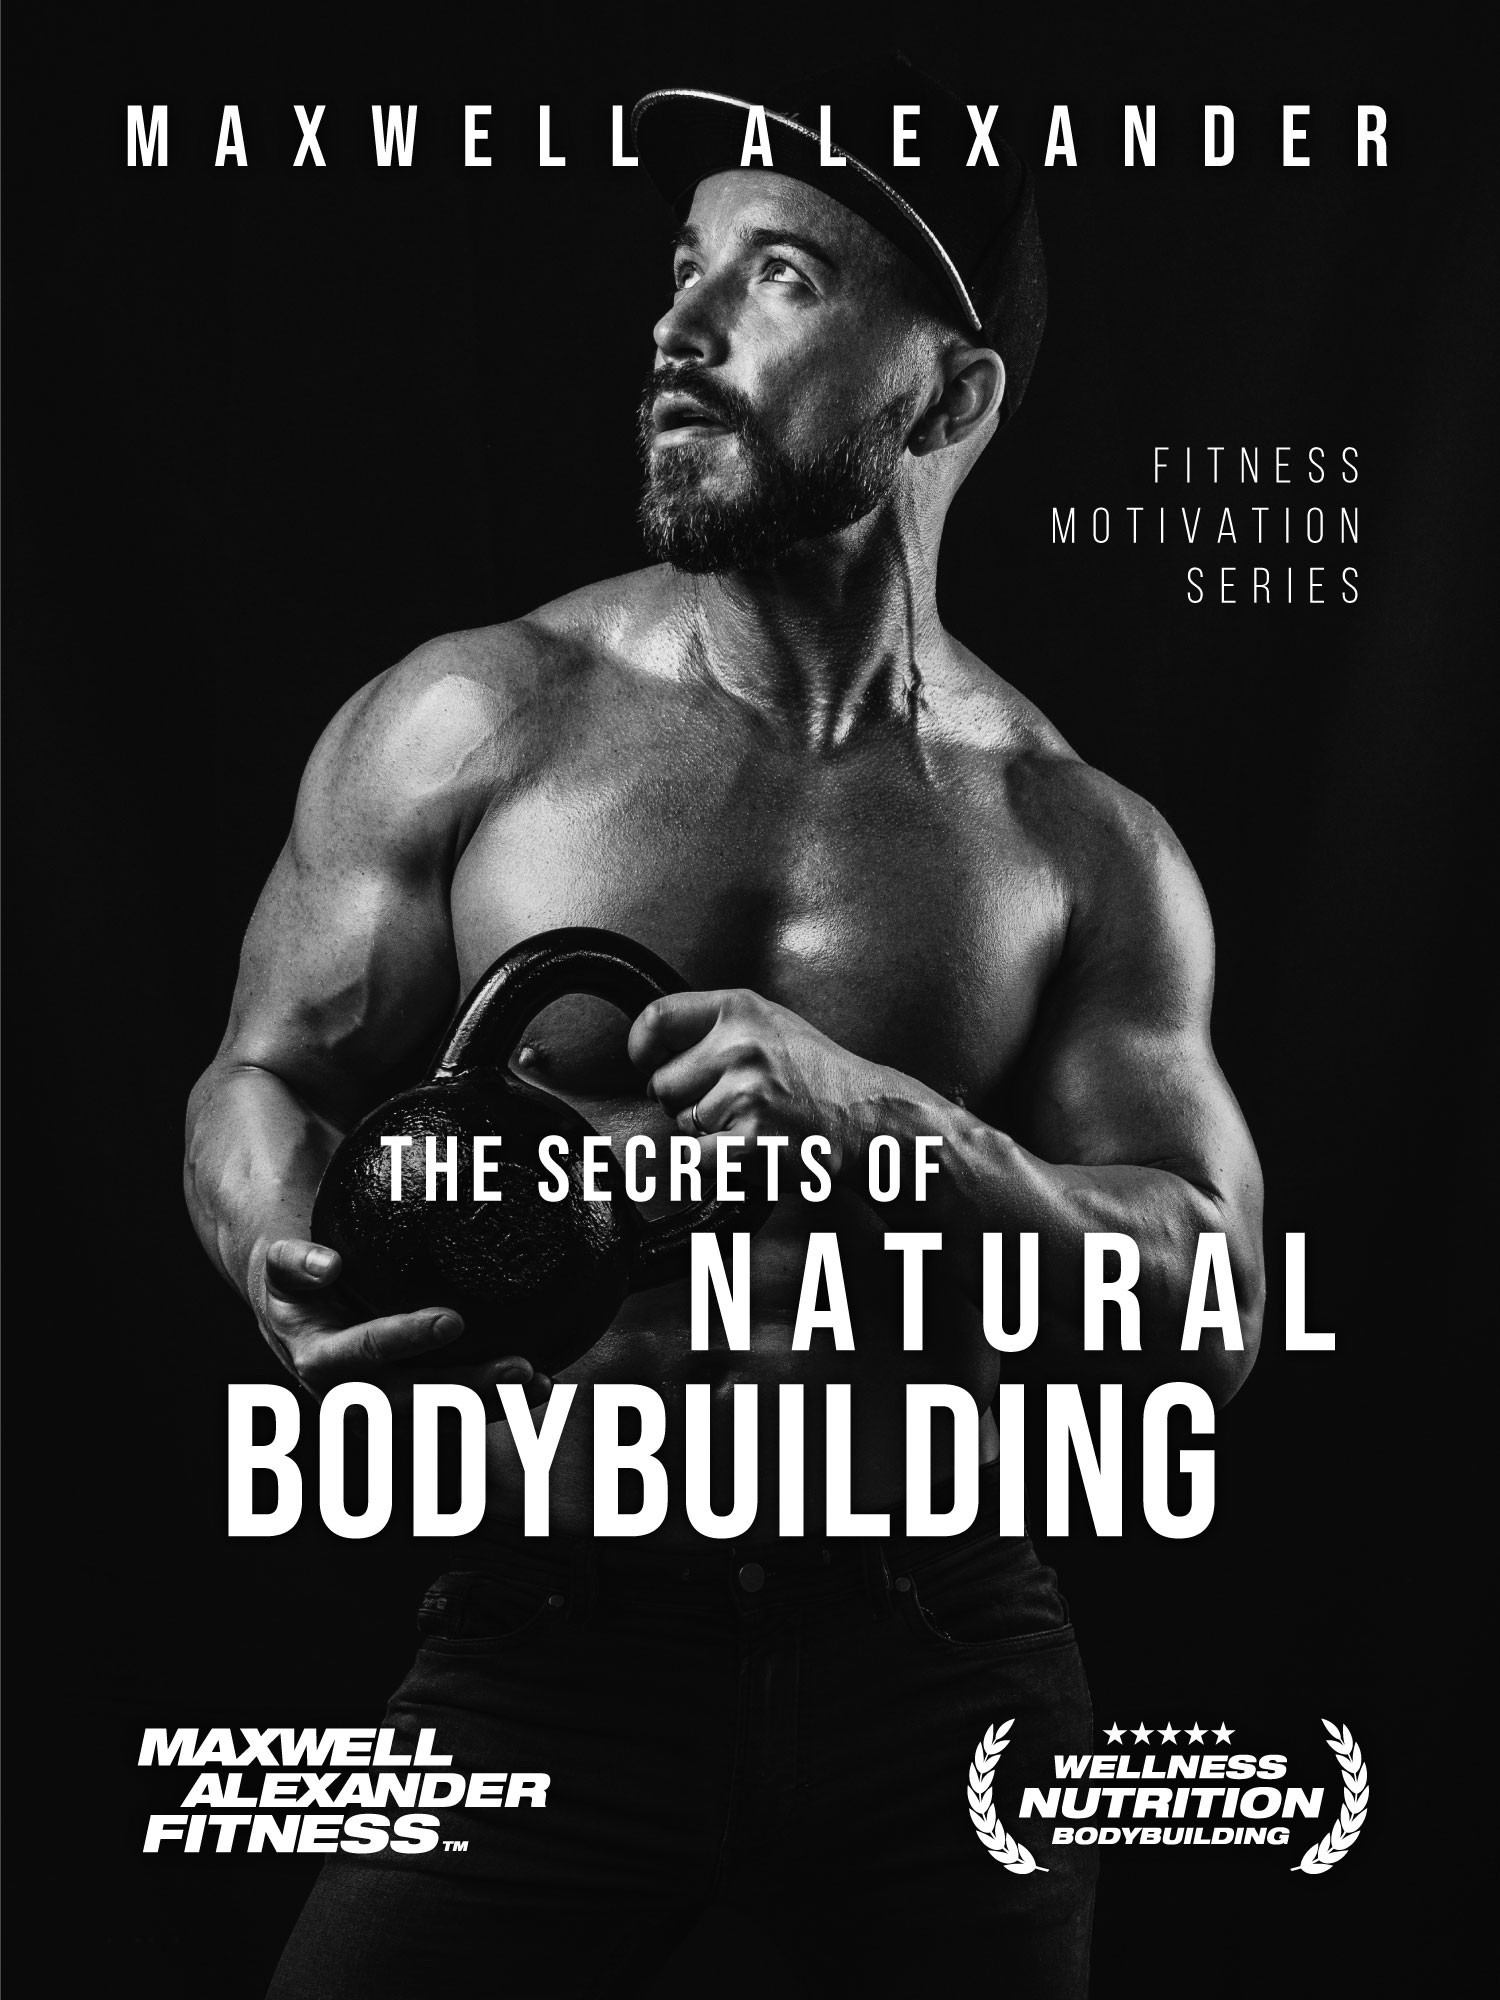 Top 5 Tips to Build Muscle Mass Fast - Bodybuilding 101 with Trainer Maxwell Alexander - Featured by 